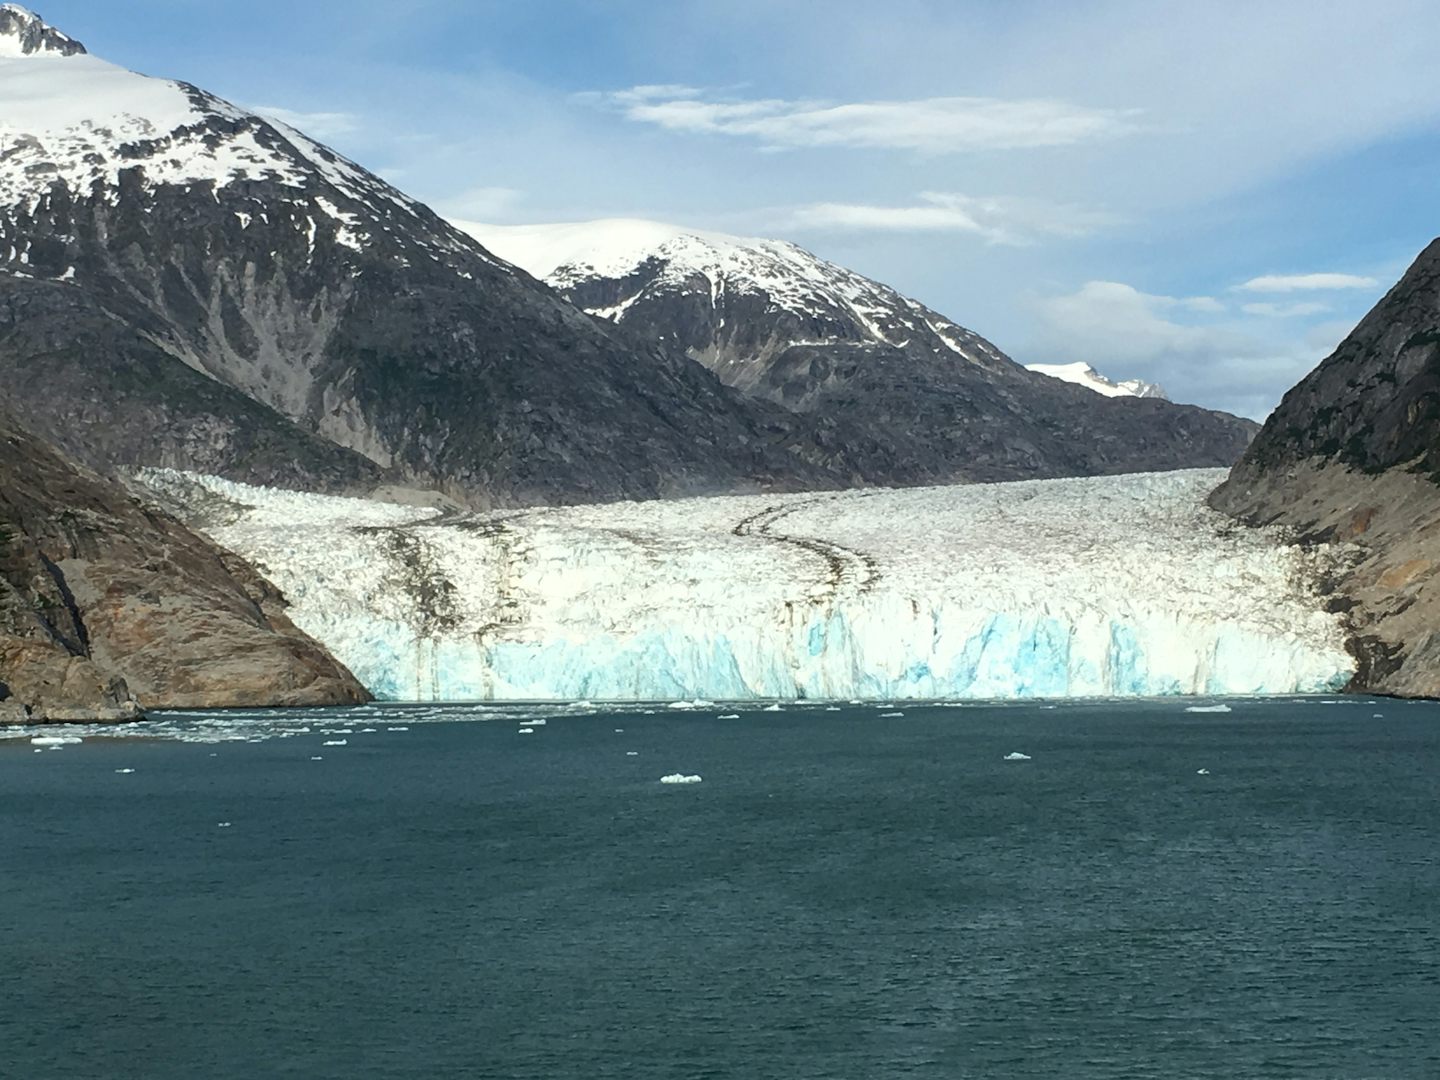 Endicott Glacier - we went here instead of Tracy Arm